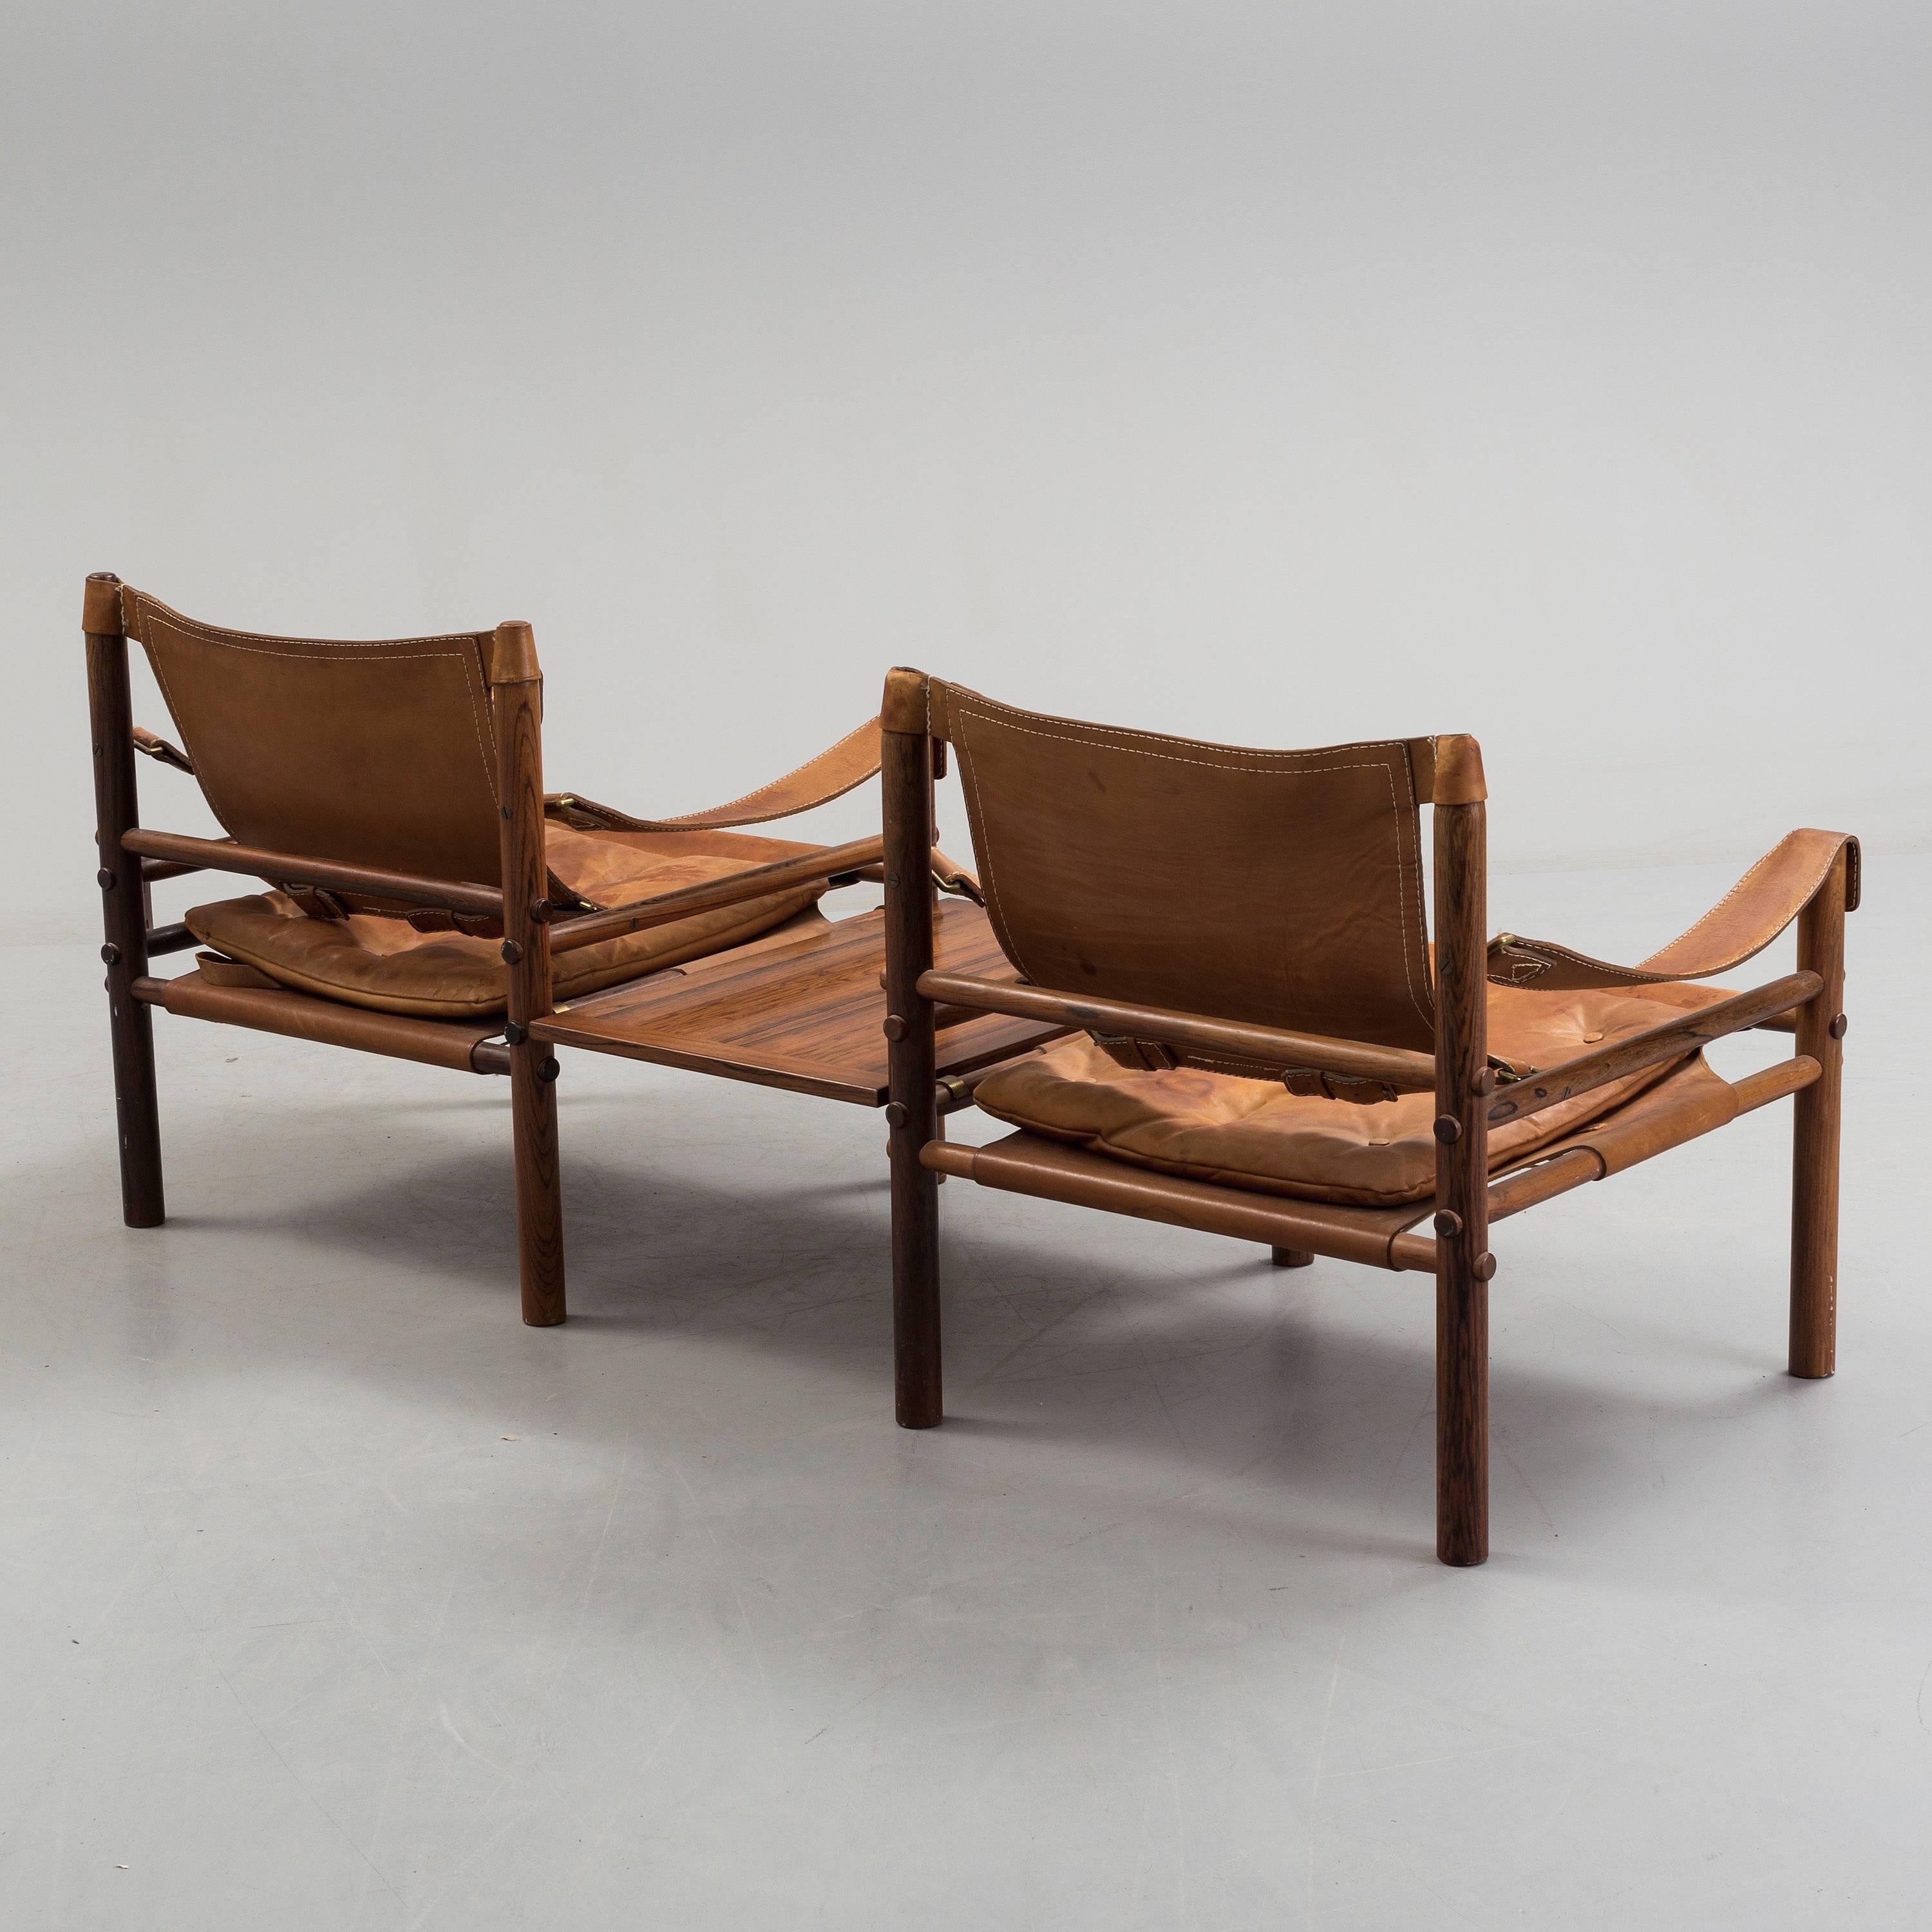 Swedish Arne Norell Rosewood and Tan Leather Safari Sirocco Chairs, Sweden, 1960s